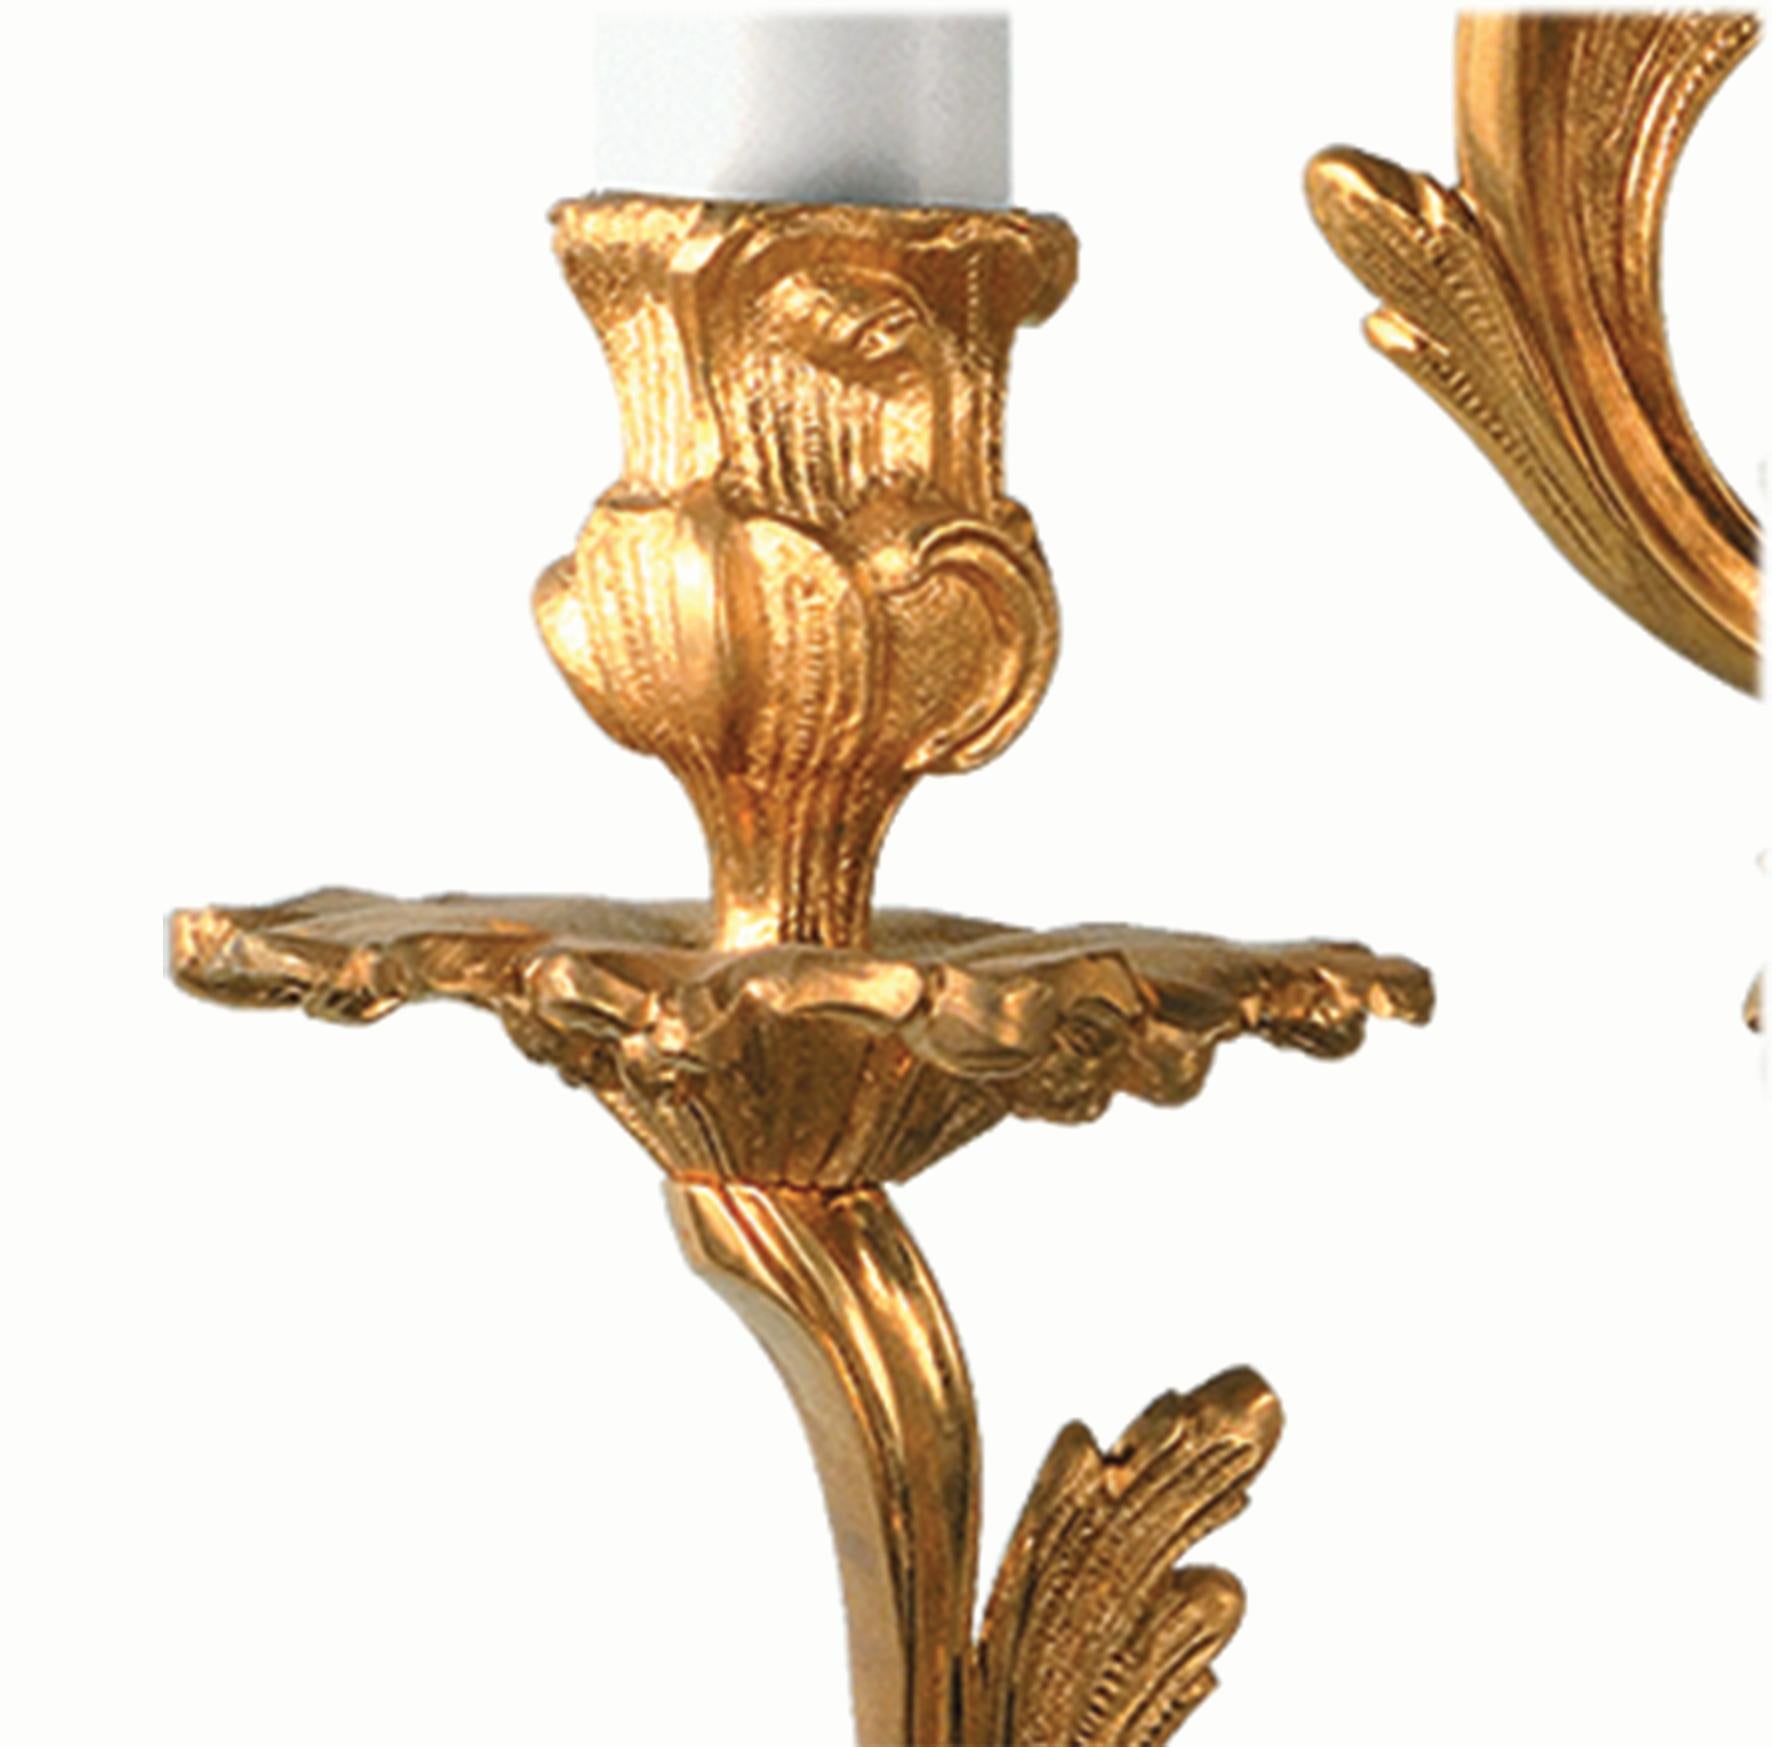 5-Light applique in gold patinated bronze. Each object is handcrafted and the care for every detail makes each item unique in its kind. The style of this applique is a modern reinterpretation of wall lamp from the second half of the 18th century in